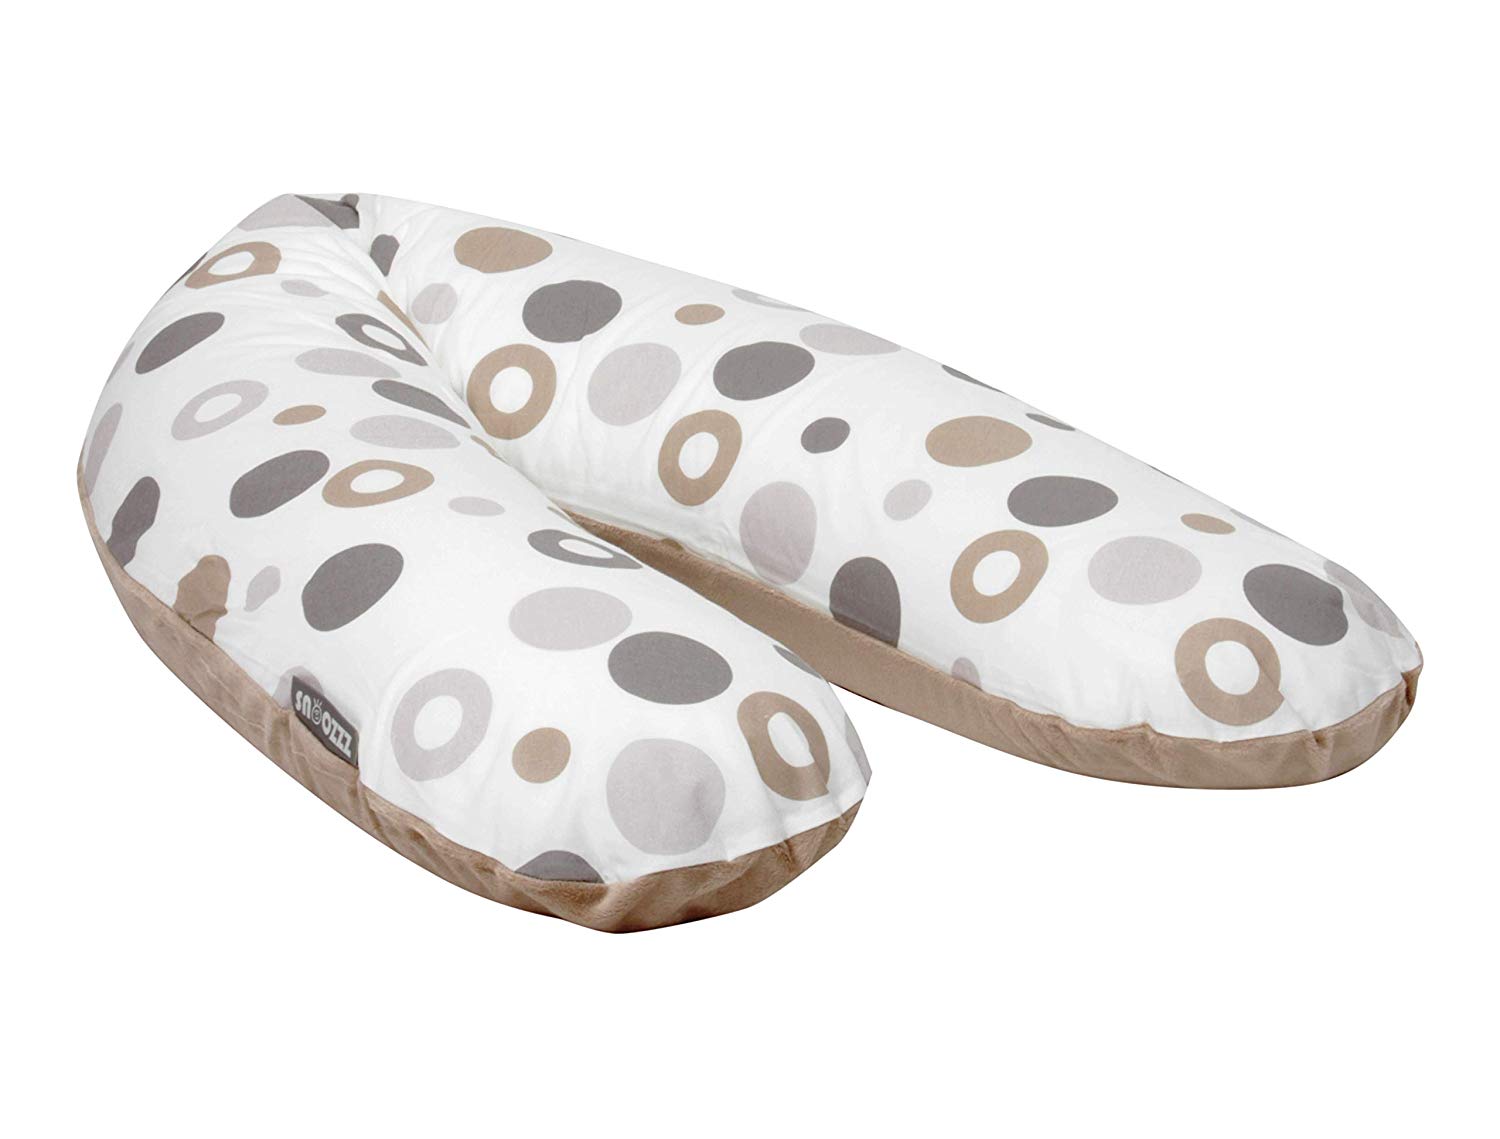 Snoozzz Nursing Pillow Support Pillow Side Sleeper Pillow 185 cm Includes Cotton and Microfibre Cover - Filling: Quiet and Fine Micro Beads - Taupe Circles